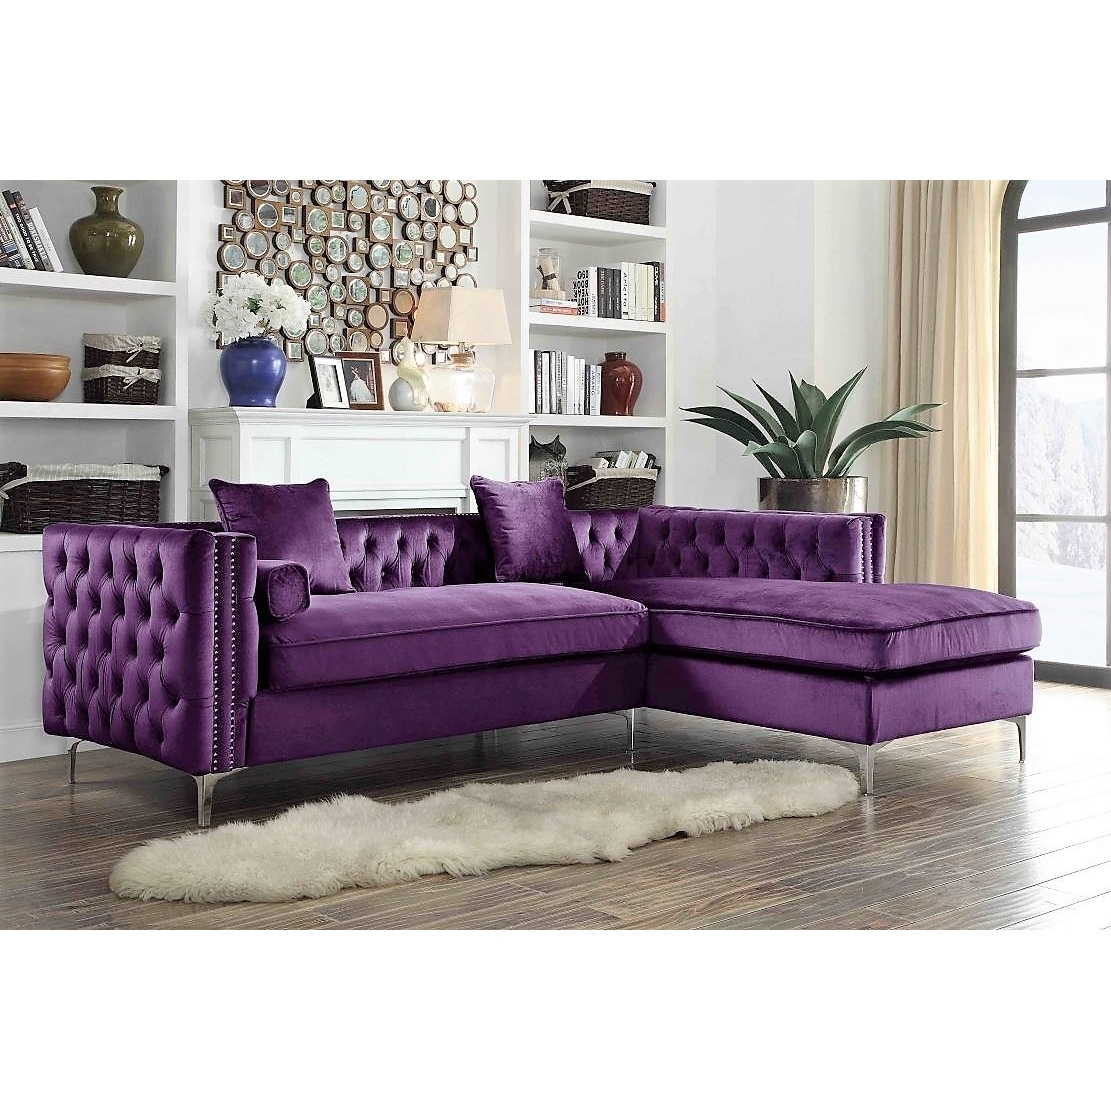 Picasso Velvet Right Facing Sectional Sofa Button Tufted With Silver Nailhead Trim Silvertone Metal Y-leg - Purple